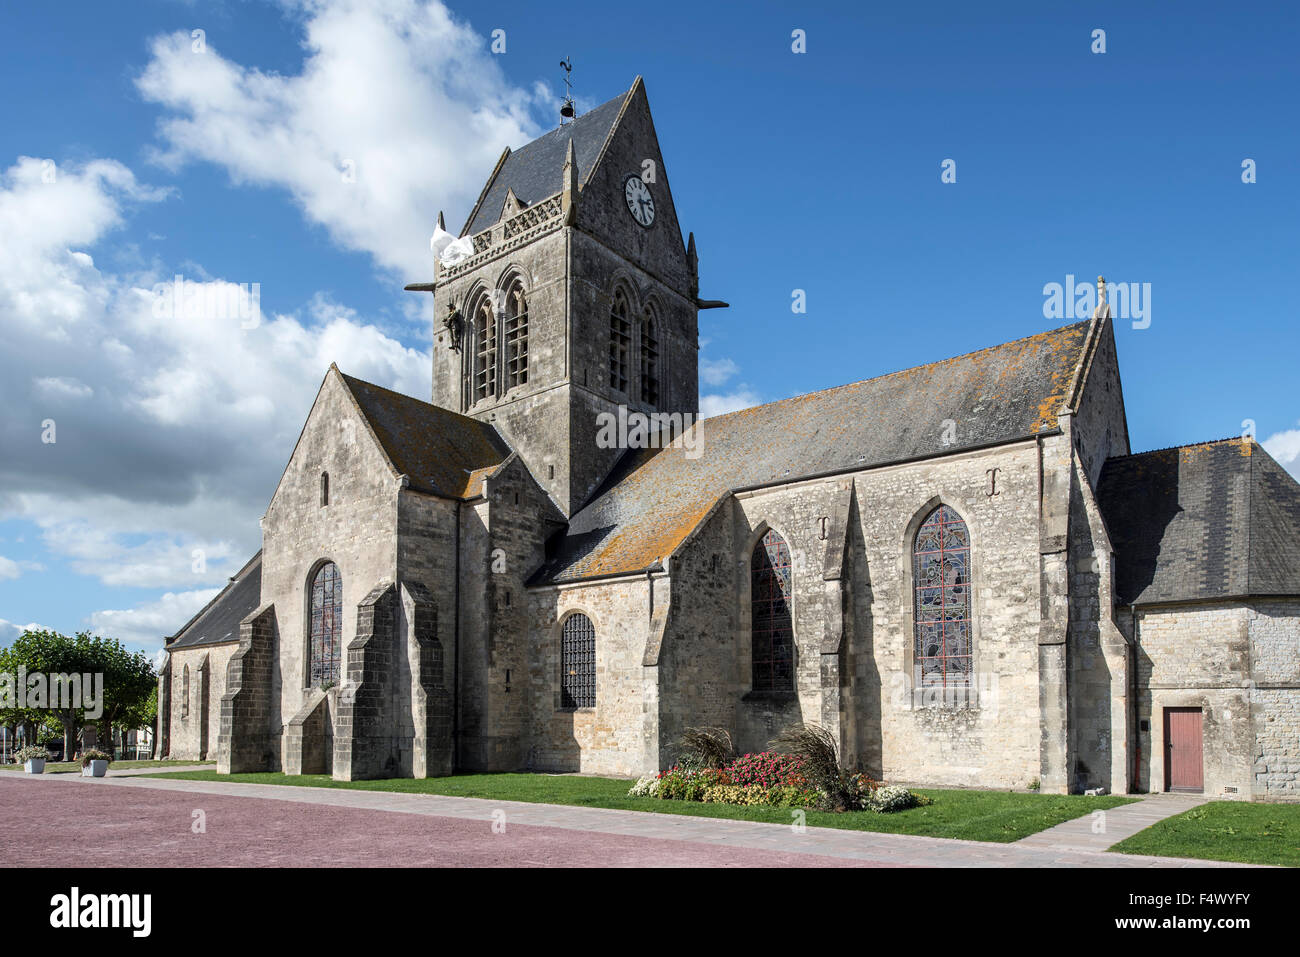 Sainte-Mère-Église church with Parachute Memorial in honour of paratrooper John Steele who fought during D-Day, Normandy, France Stock Photo